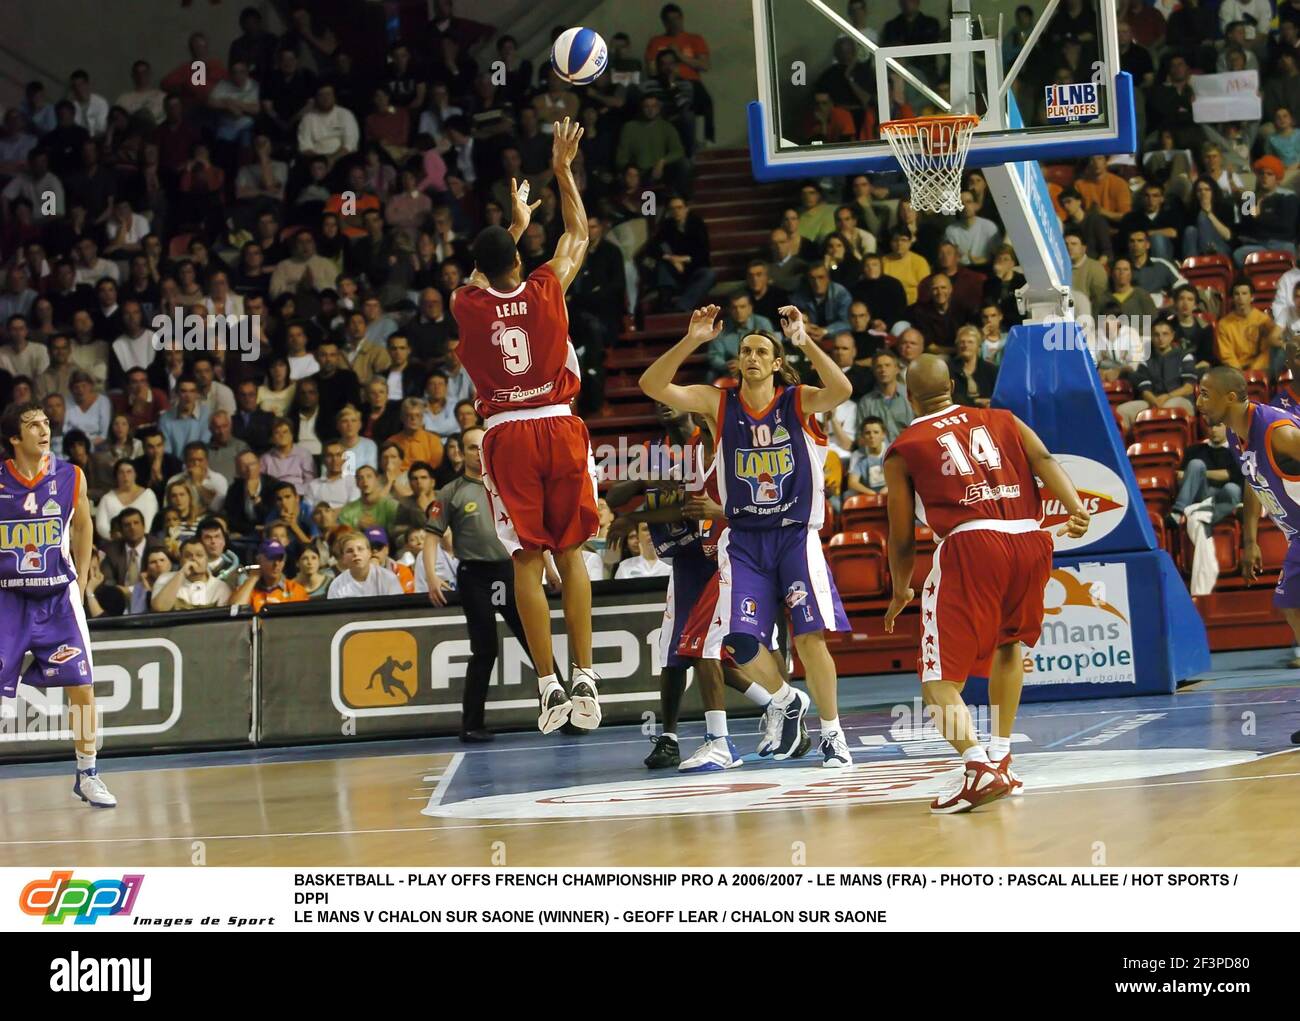 BASKETBALL - PLAY OFFS FRENCH CHAMPIONSHIP PRO A 2006/2007 - LE MANS (FRA)  - PHOTO : PASCAL ALLEE / HOT SPORTS / DPPI LE MANS V CHALON SUR SAONE  (WINNER) - GEOFF LEAR / CHALON SUR SAONE Stock Photo - Alamy